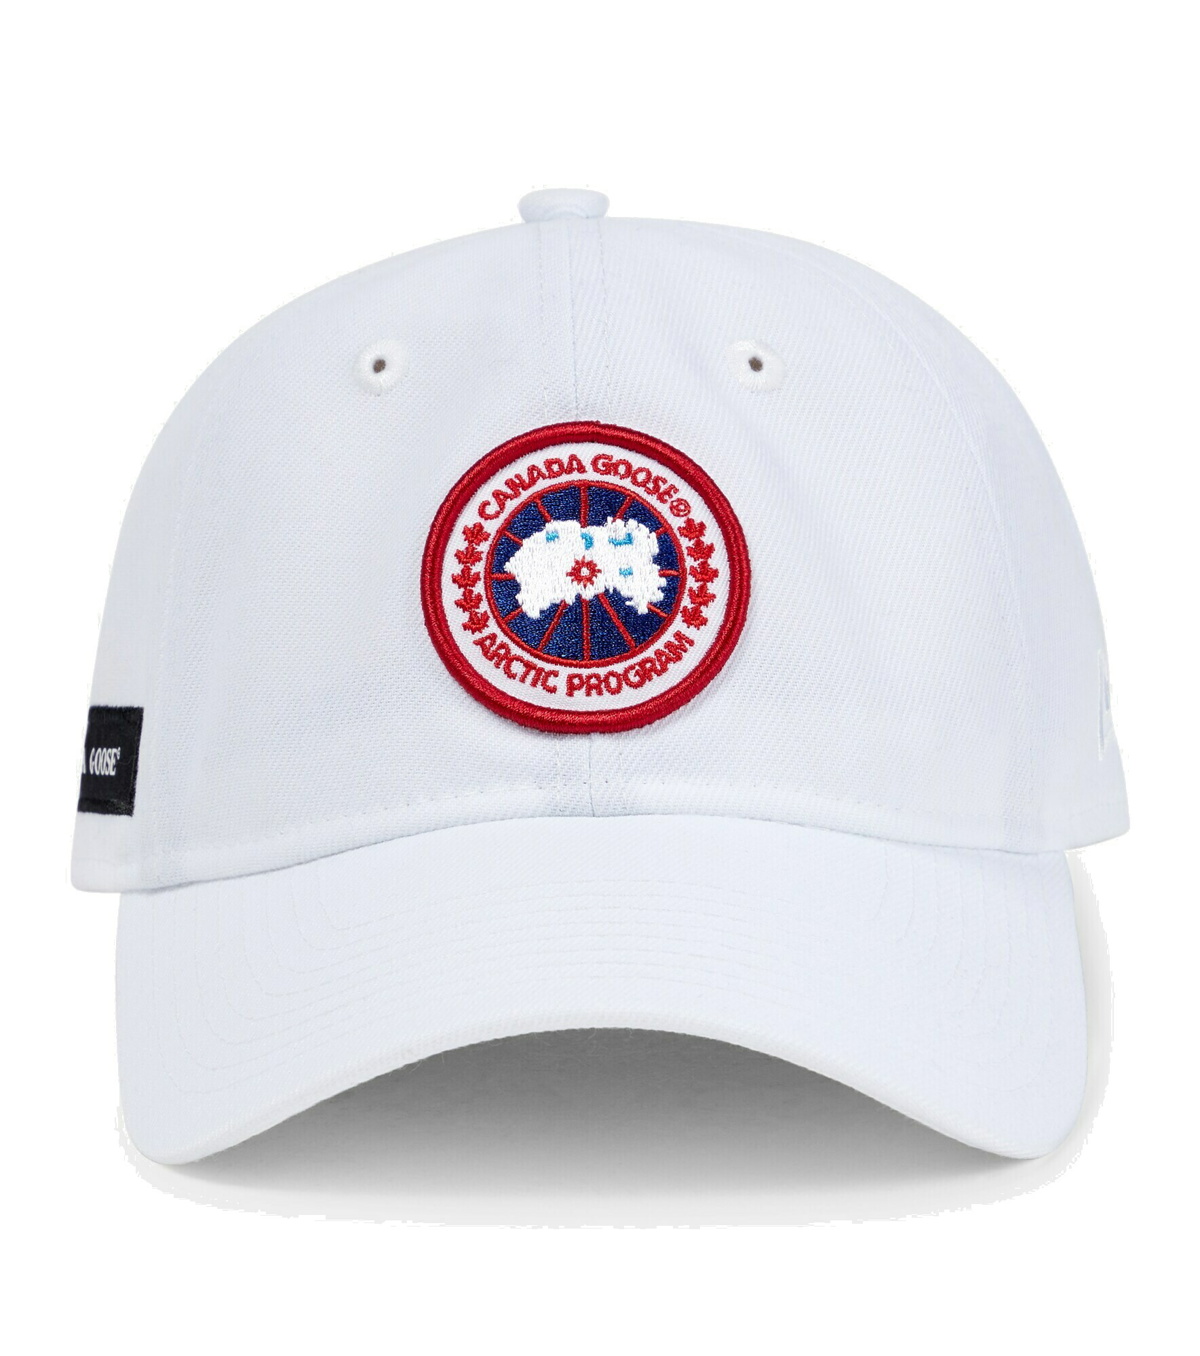 Haven technical bucket hat in white - Canada Goose